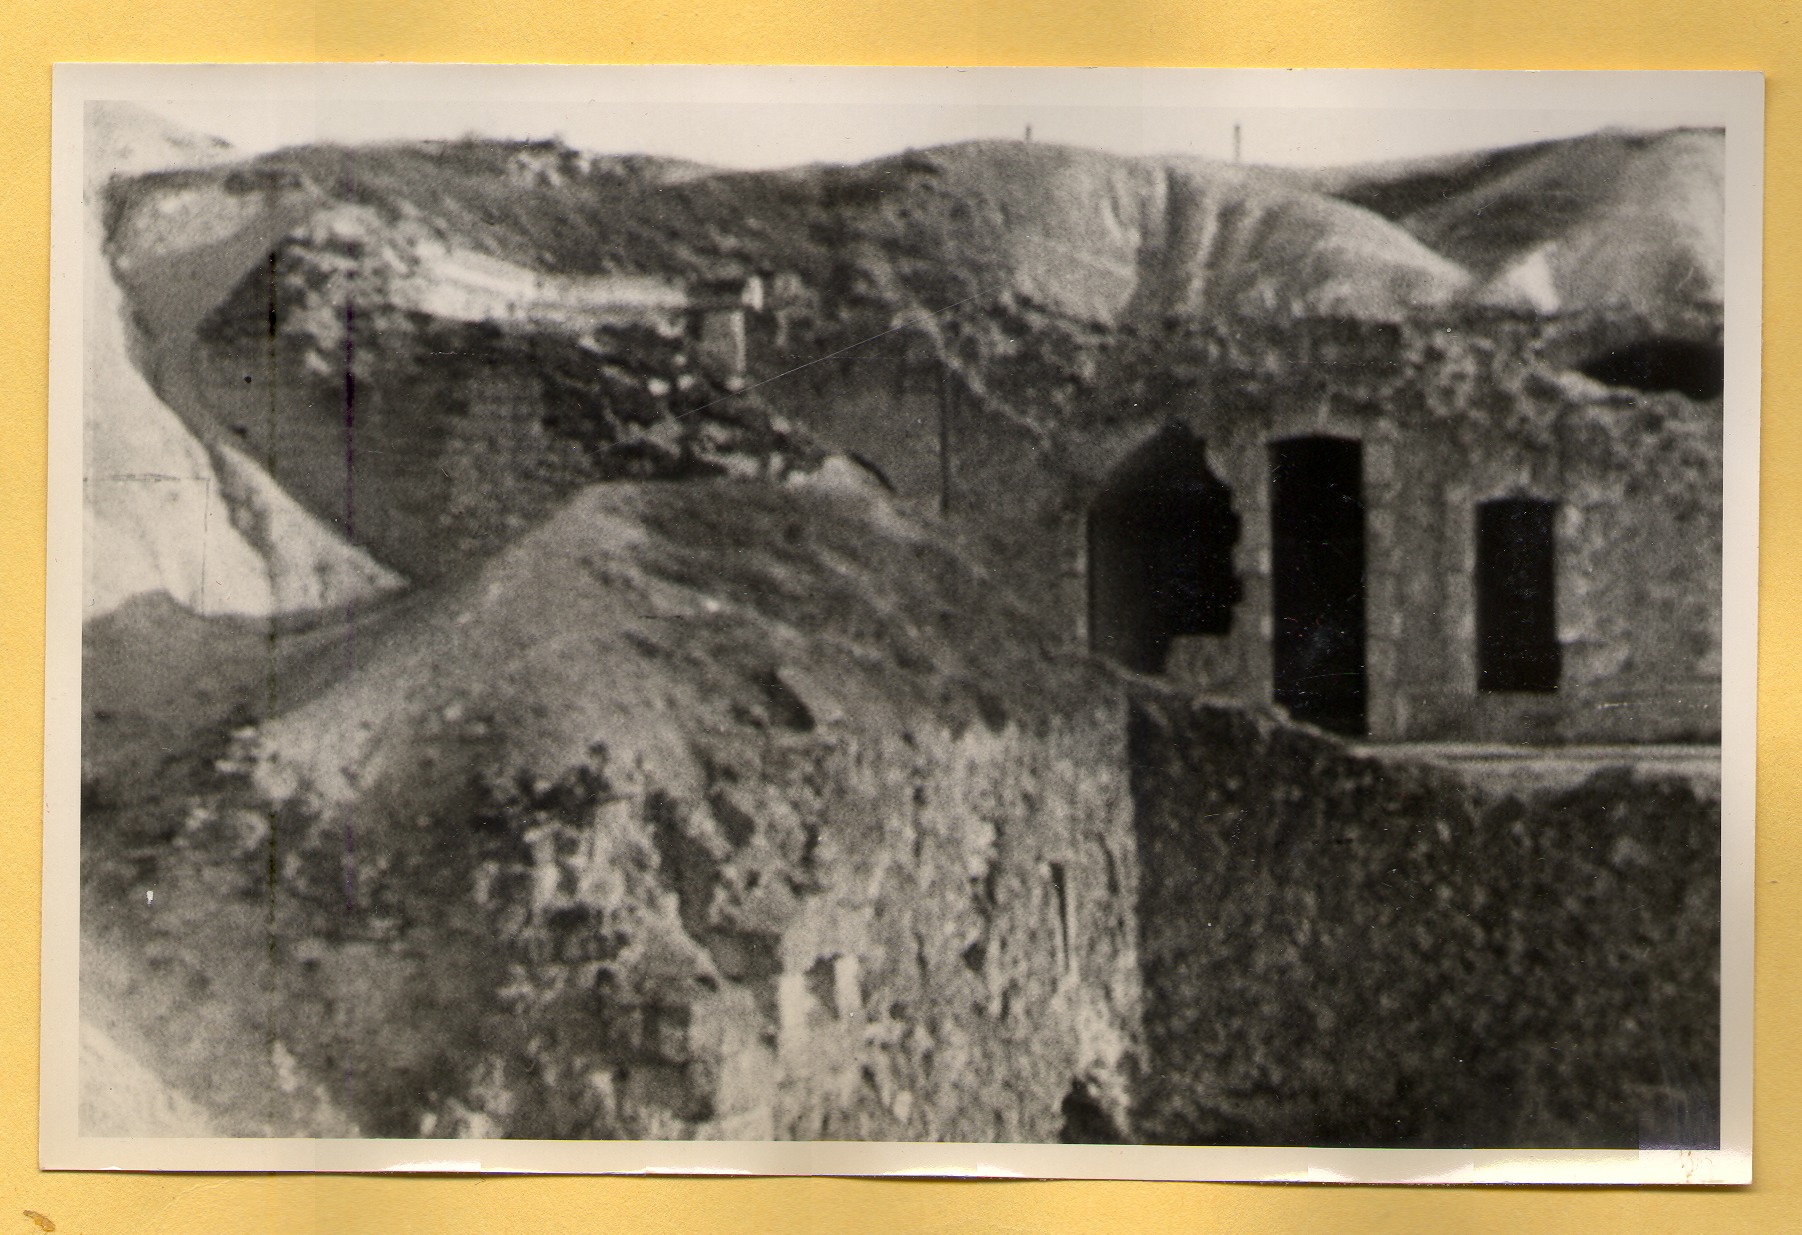 Building remains-in France after WWI: photographic print